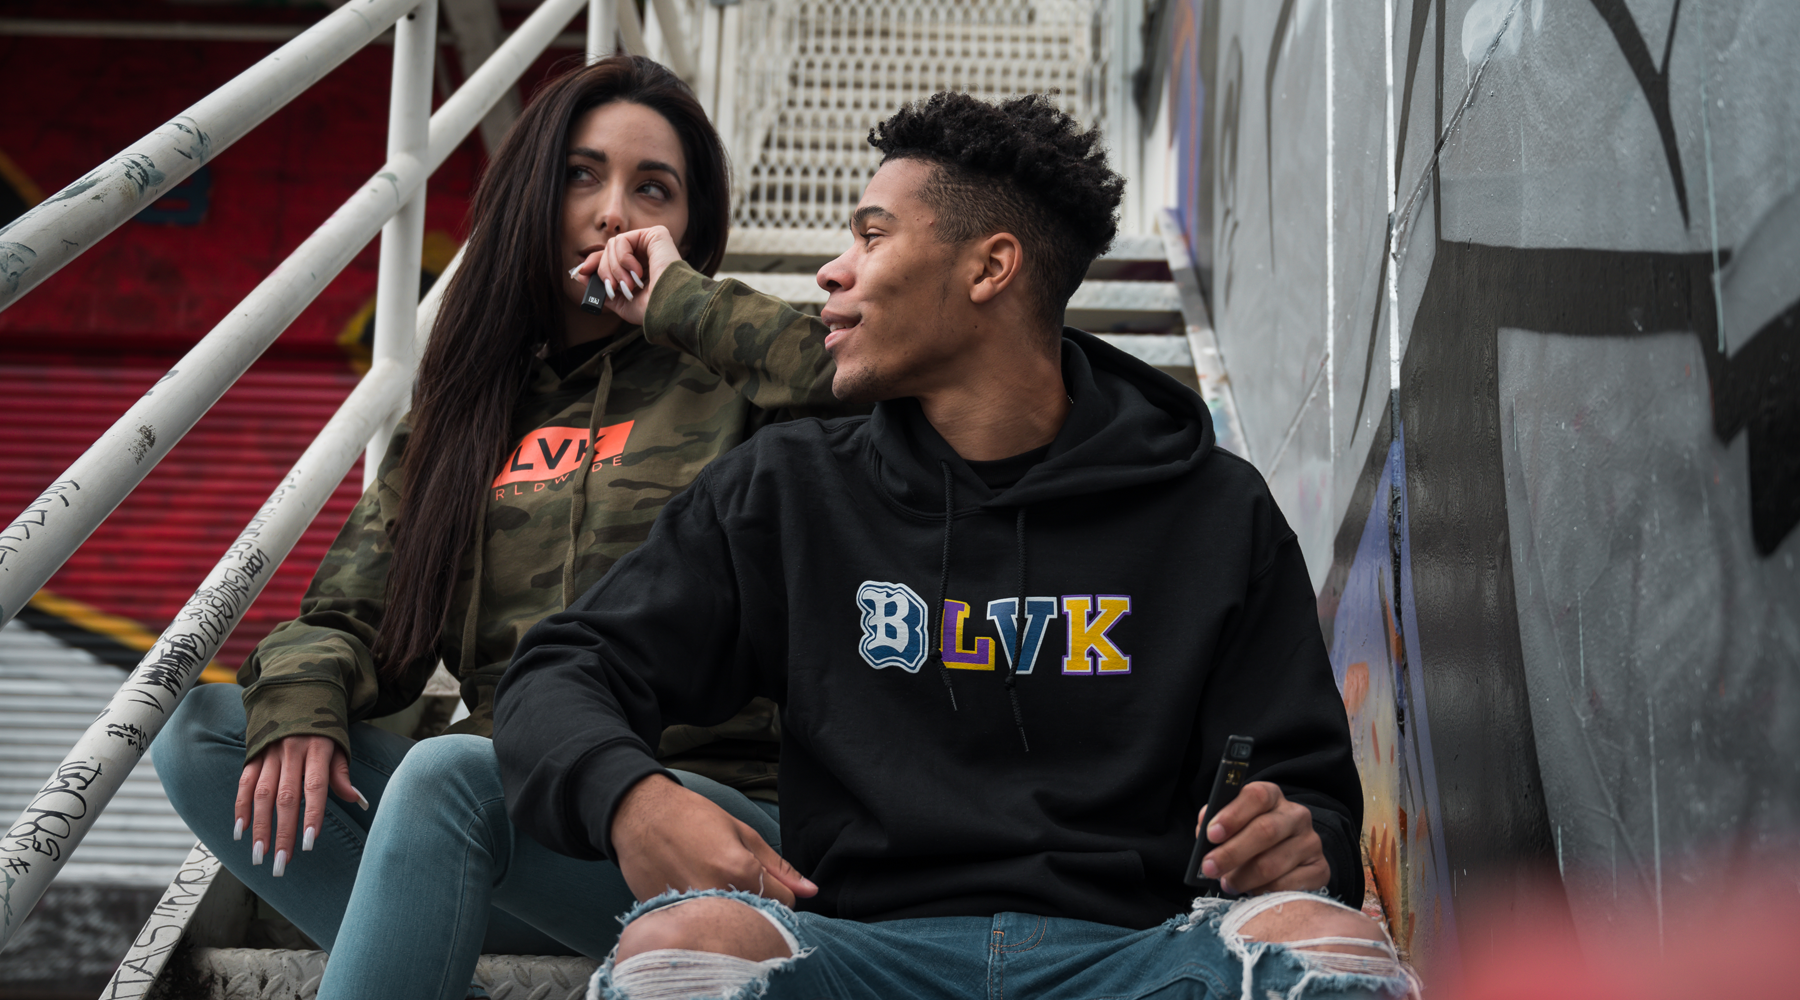 Two people sporting BLVK attire and smoking BLVK Label.